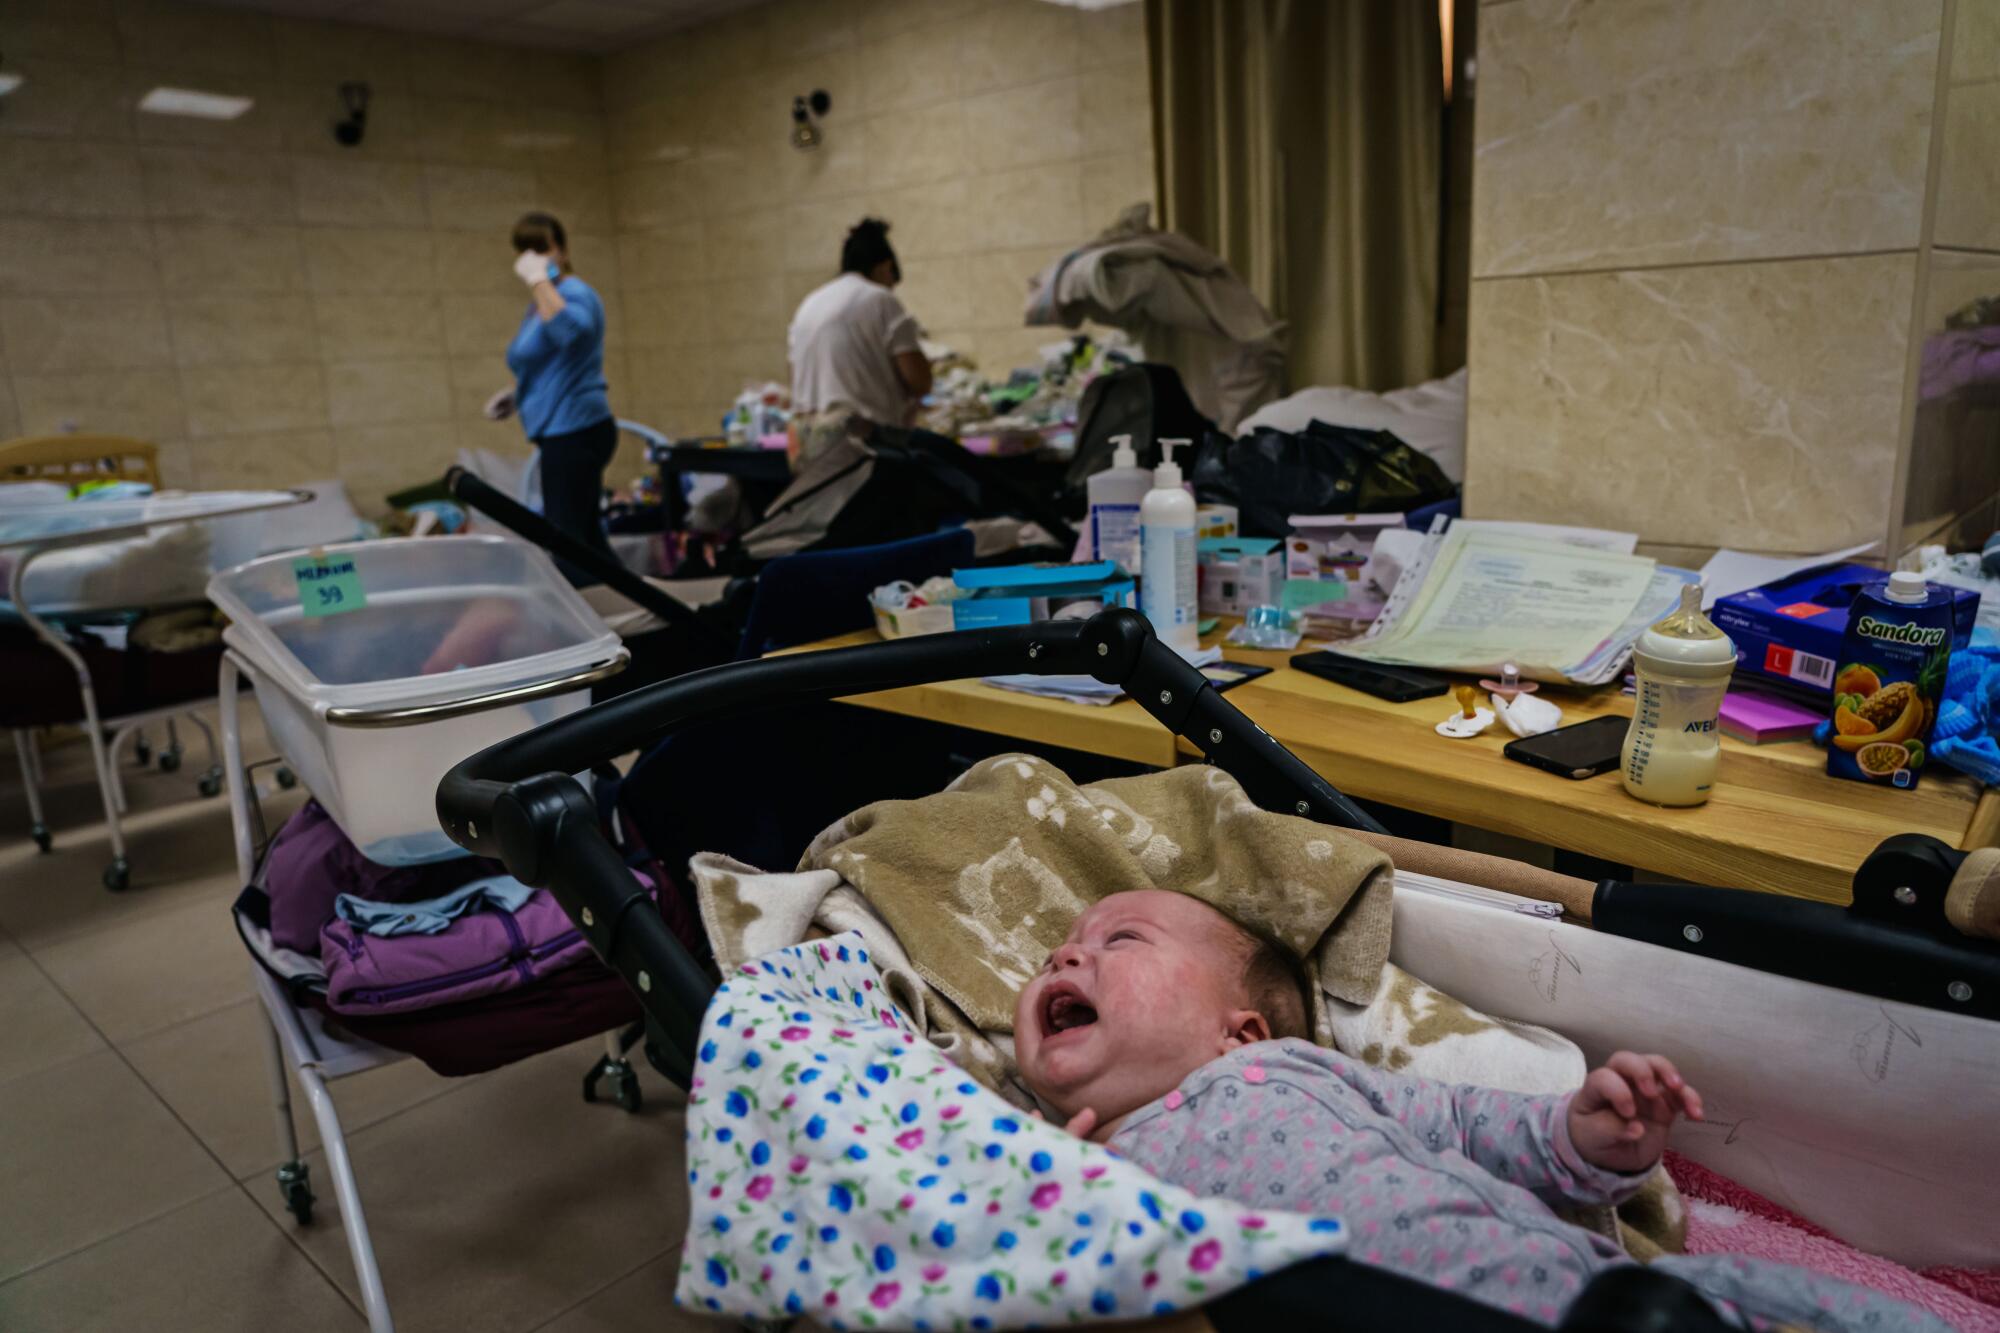 A baby cries for attention in a stroller in a makeshift nursery underground in the outskirts of Kyiv, Ukraine.